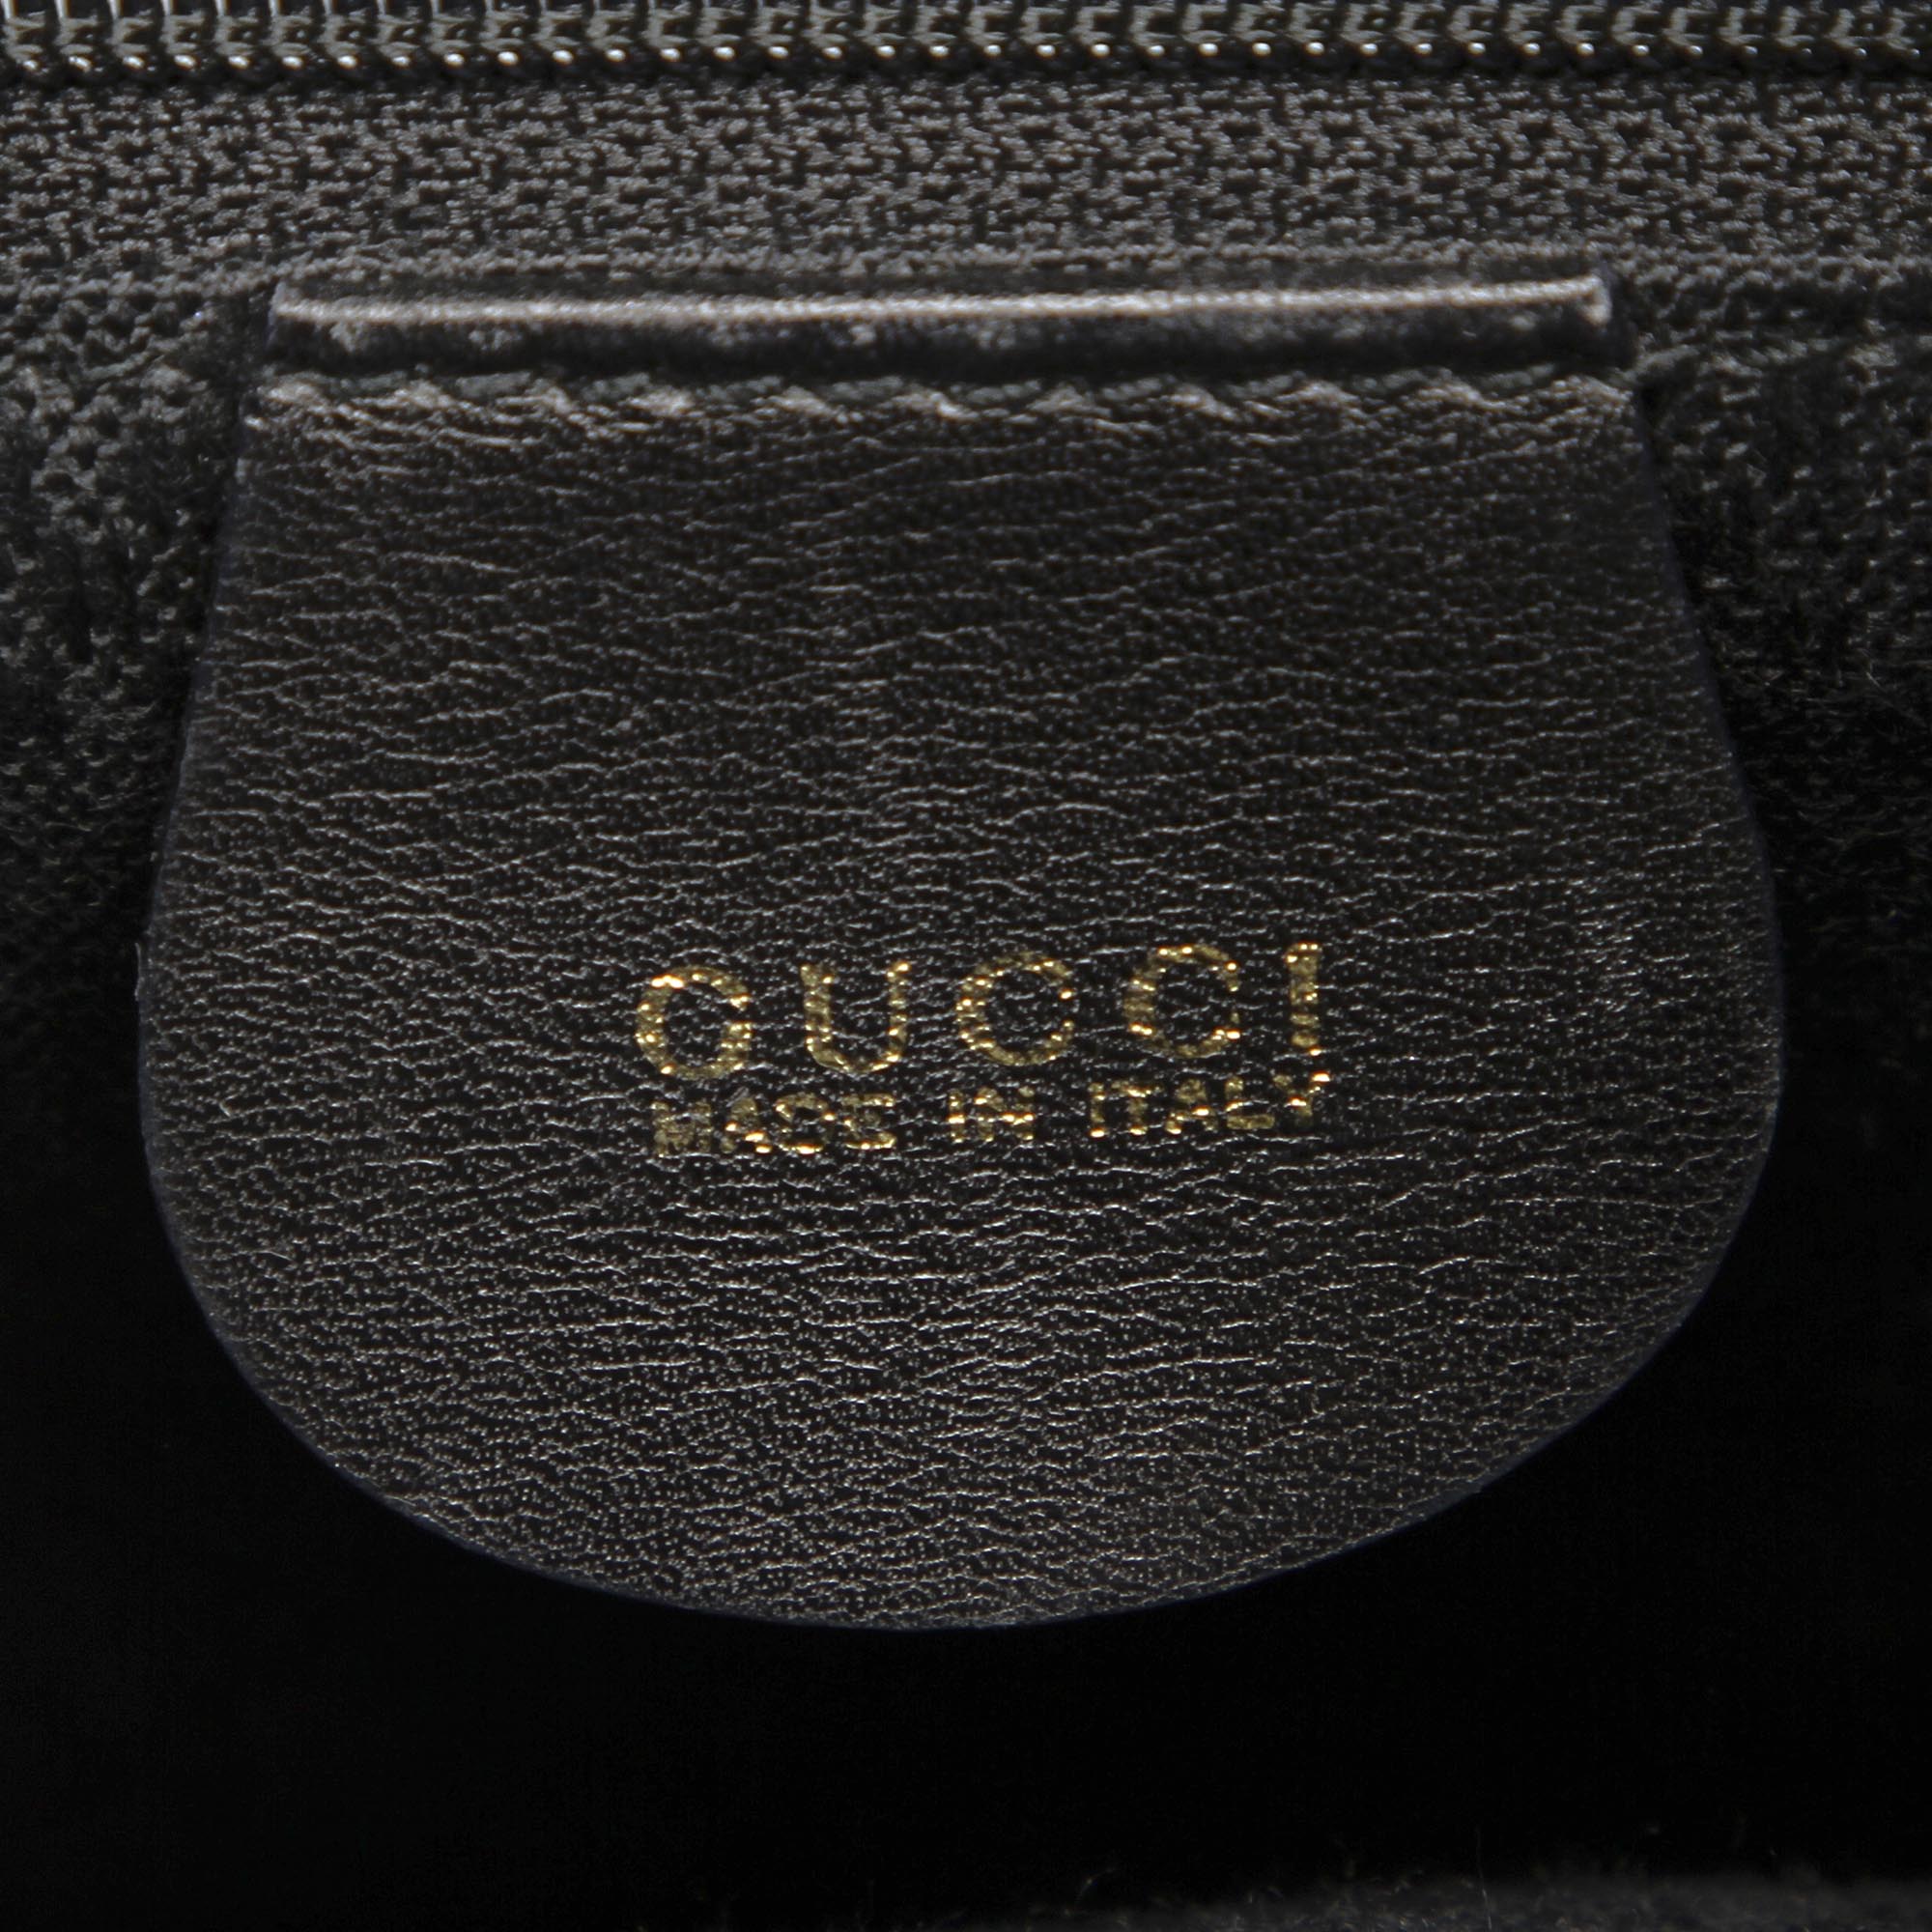 Gucci Gucci Vintage Small Bamboo Black  Backpack NW5322